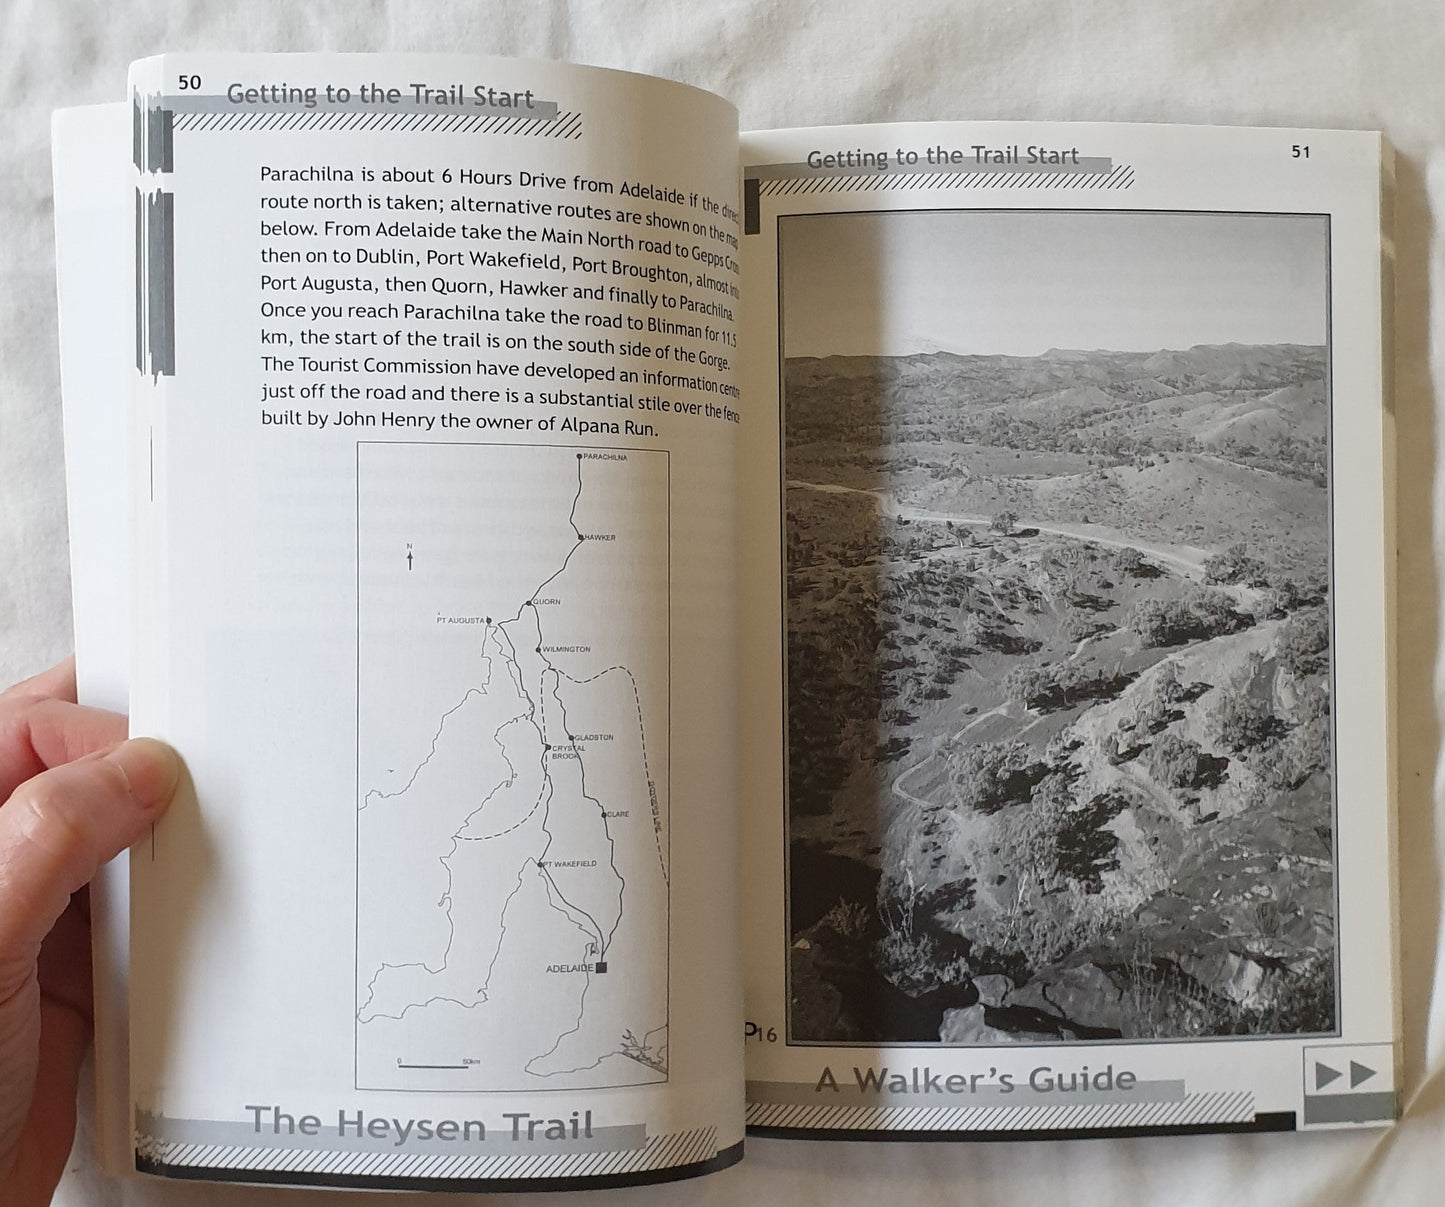 The Heysen Trail A Walker’s Guide by Terry Lavender